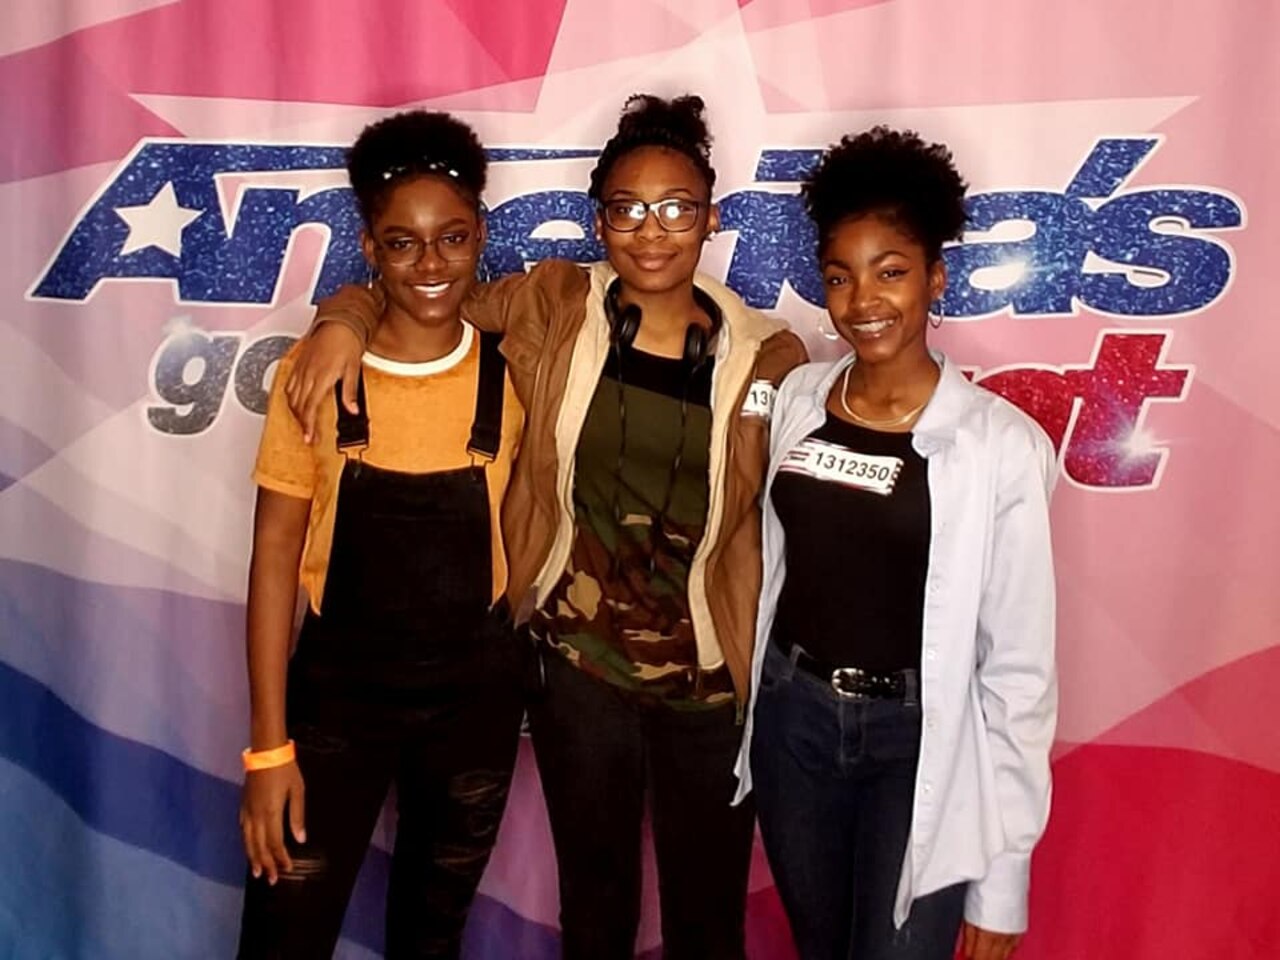 Three young ladies pose for photo at an America’s Got Talent event.